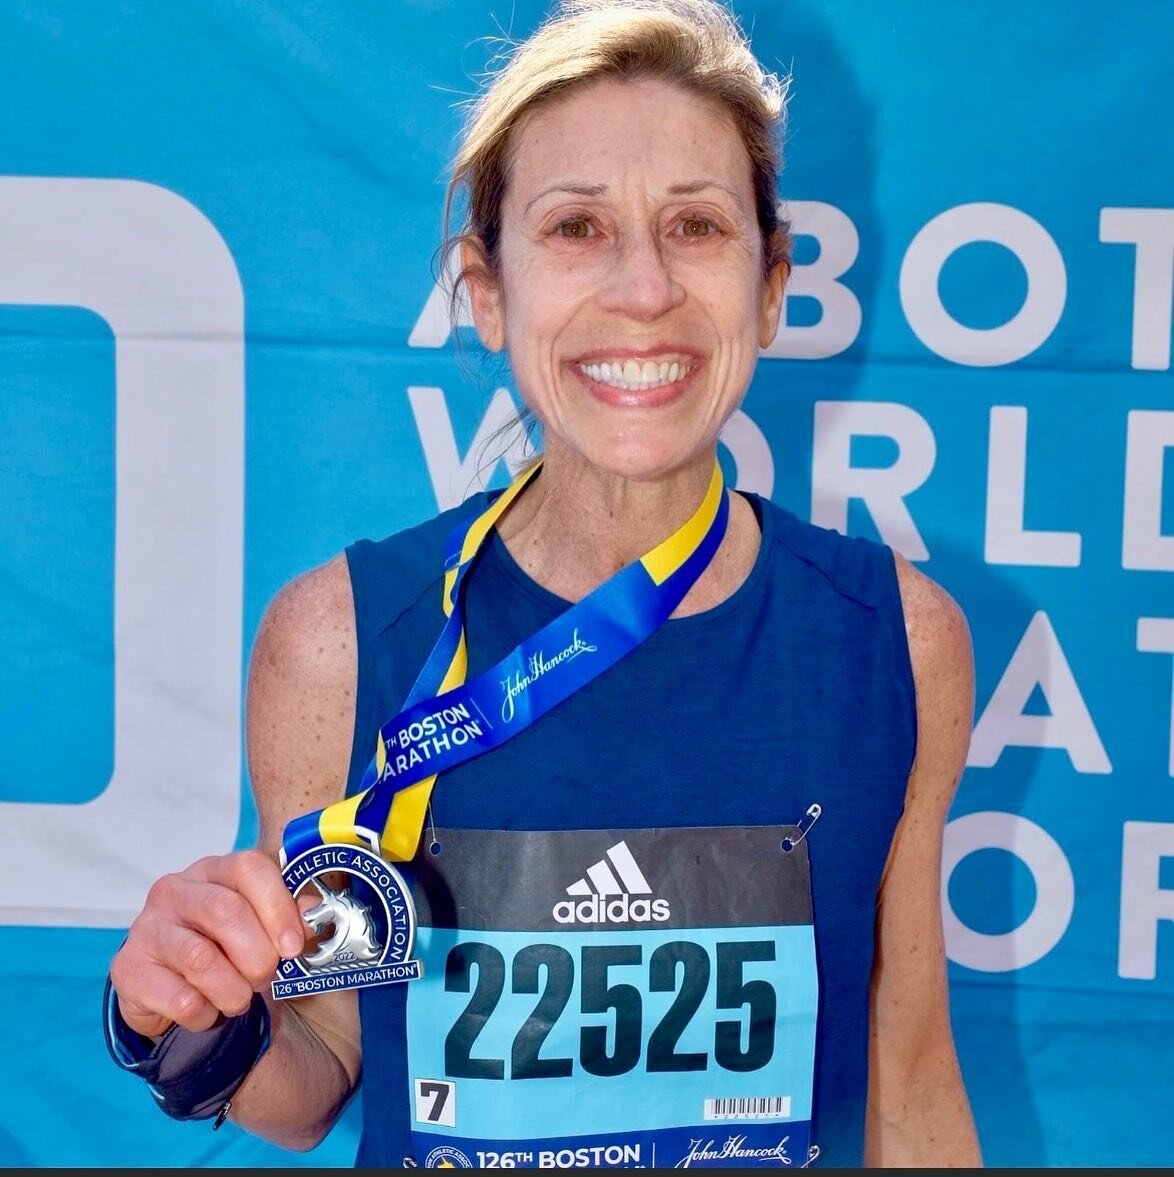 Despite excellent weather like Monday&rsquo;s, the Boston Marathon is still hard even by marathon standards.

But our supremely dedicated, course-experience-hardened, and pace-mastering crew had no bad races at all. Lauren Tanenbaum ran the marathon 